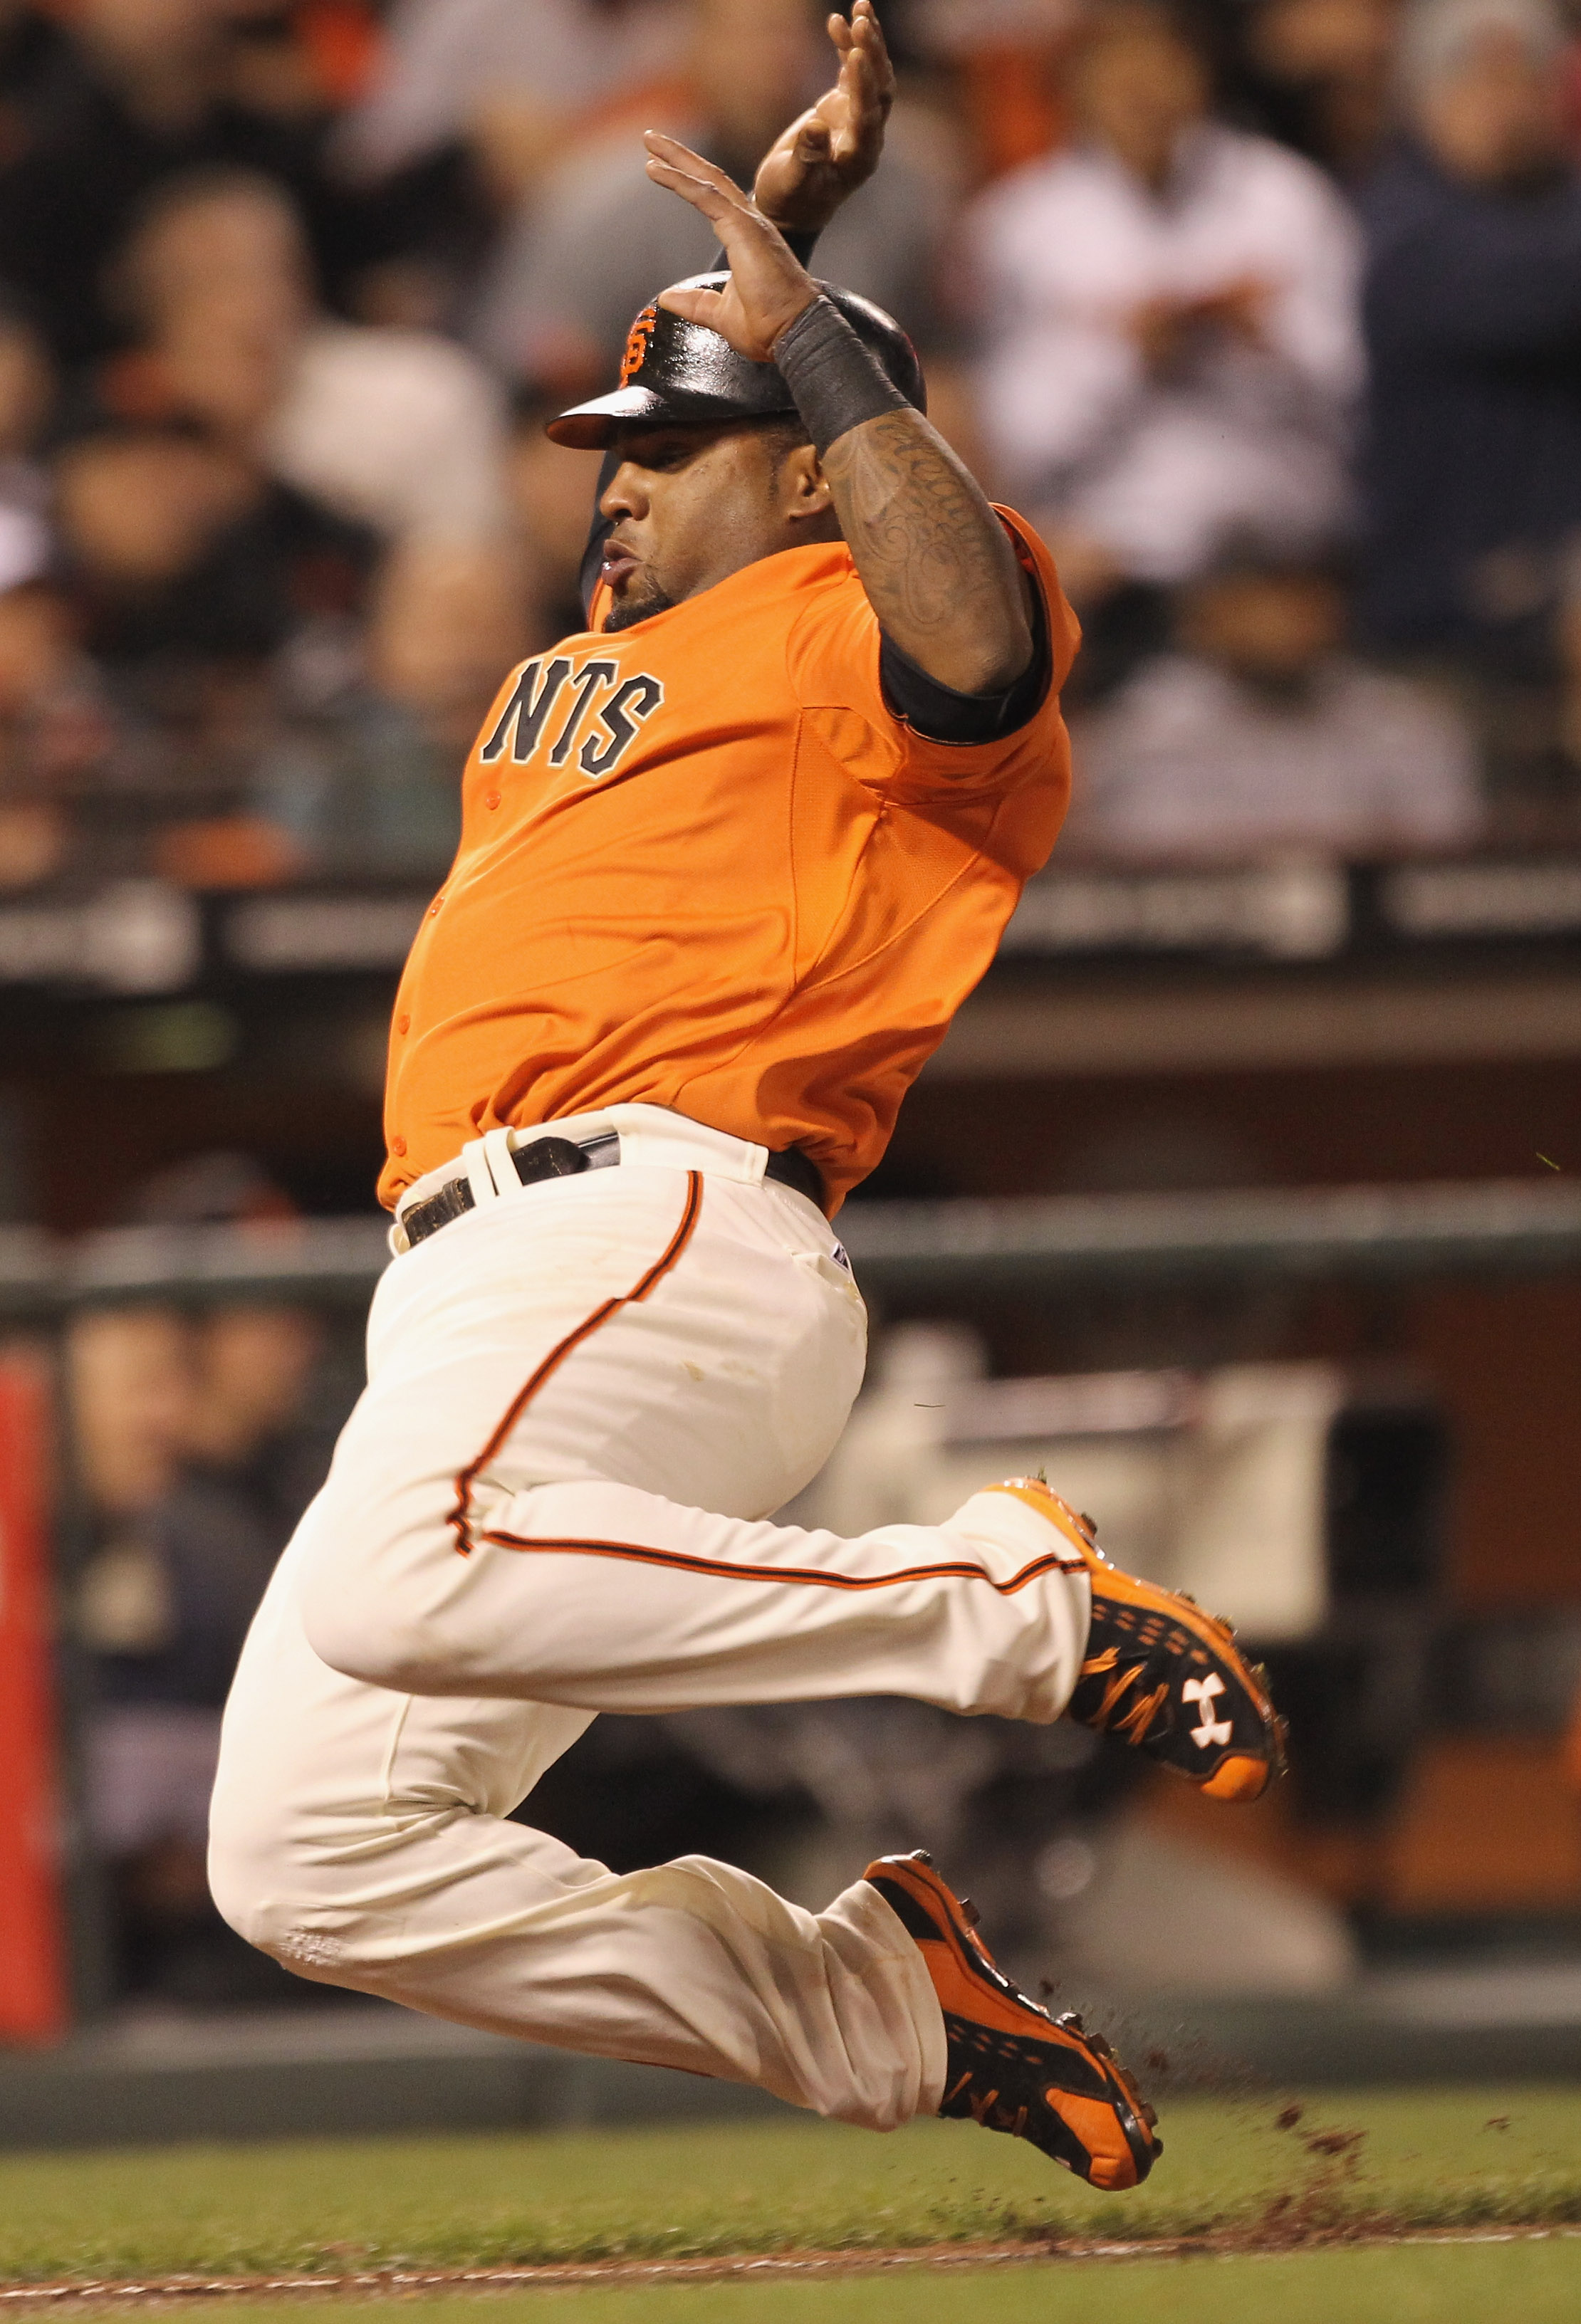 The Giants haven't been any good at all on offense without Kung Fu Panda.